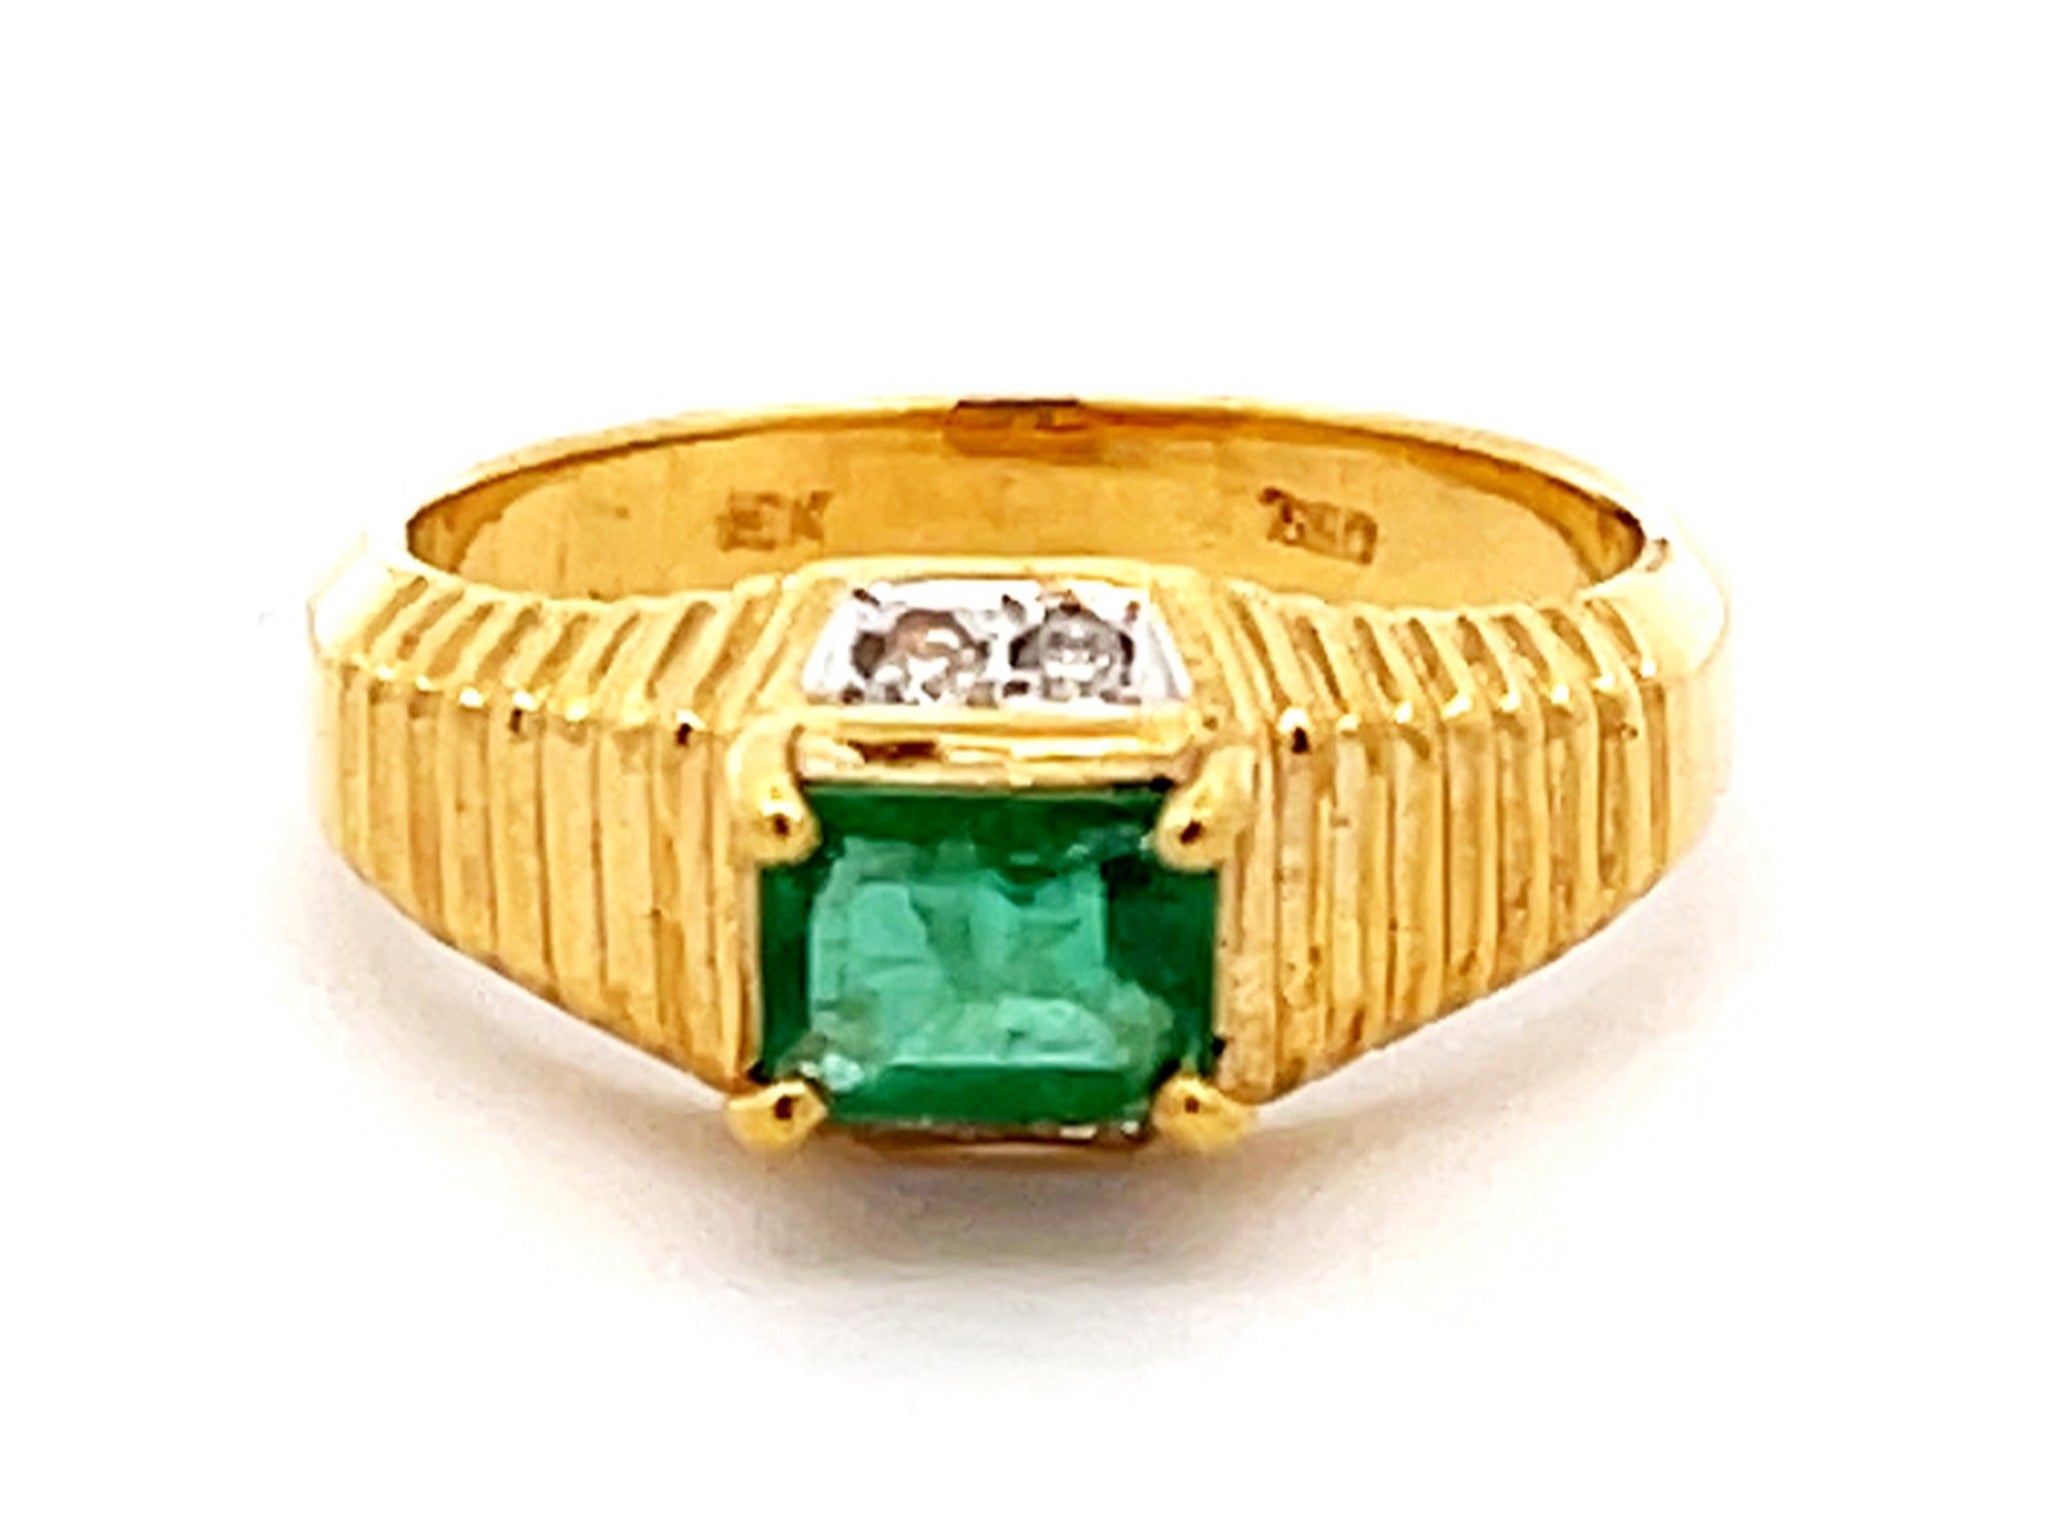 Vintage Green Emerald and Diamond Band Ring in 18k Yellow Gold